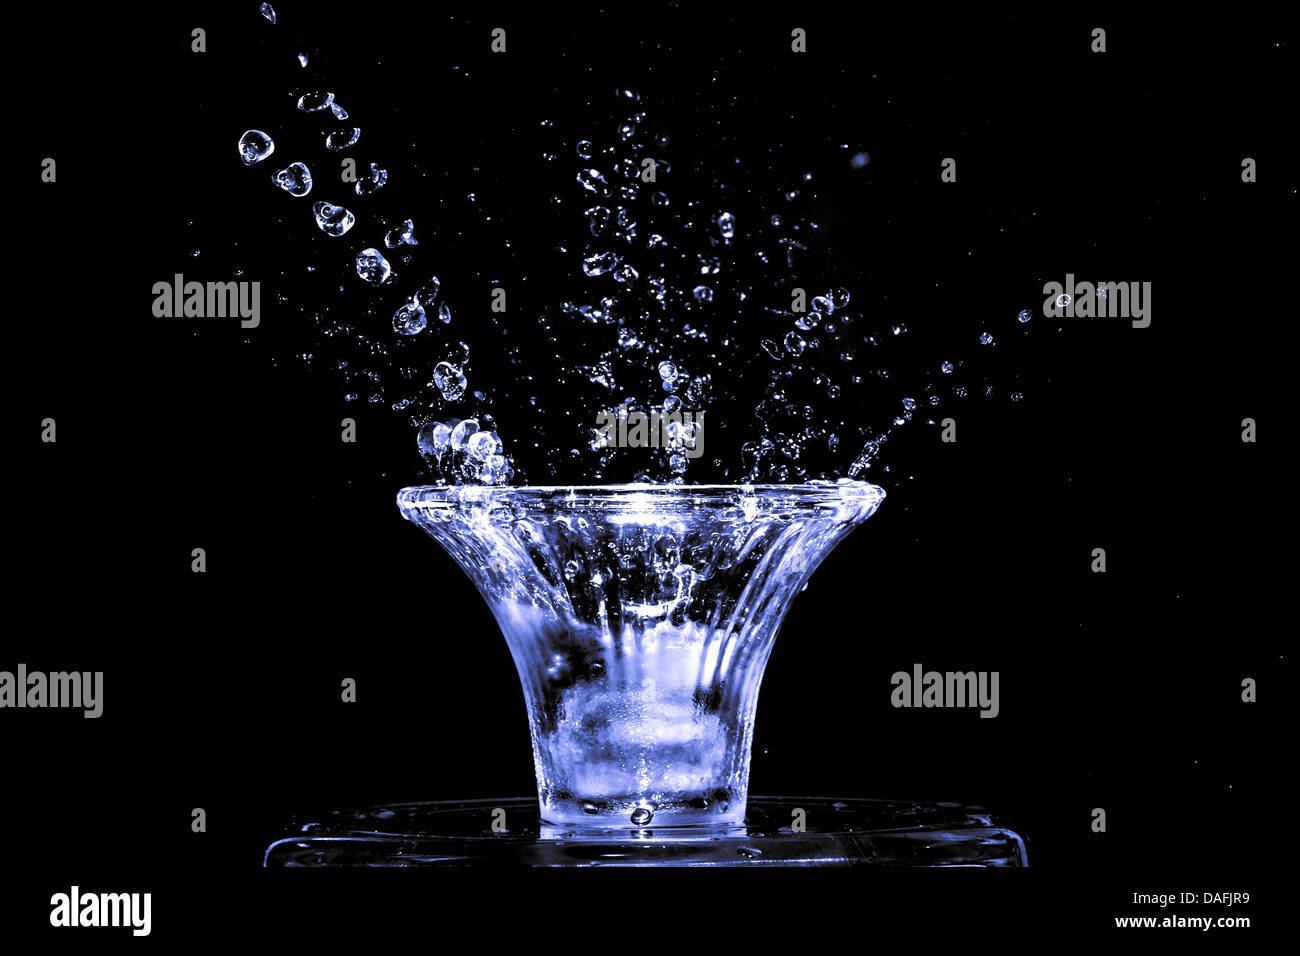 Stroboscopic effect created using flash capturing the motion ice as it splashes into a glass Stock Photo